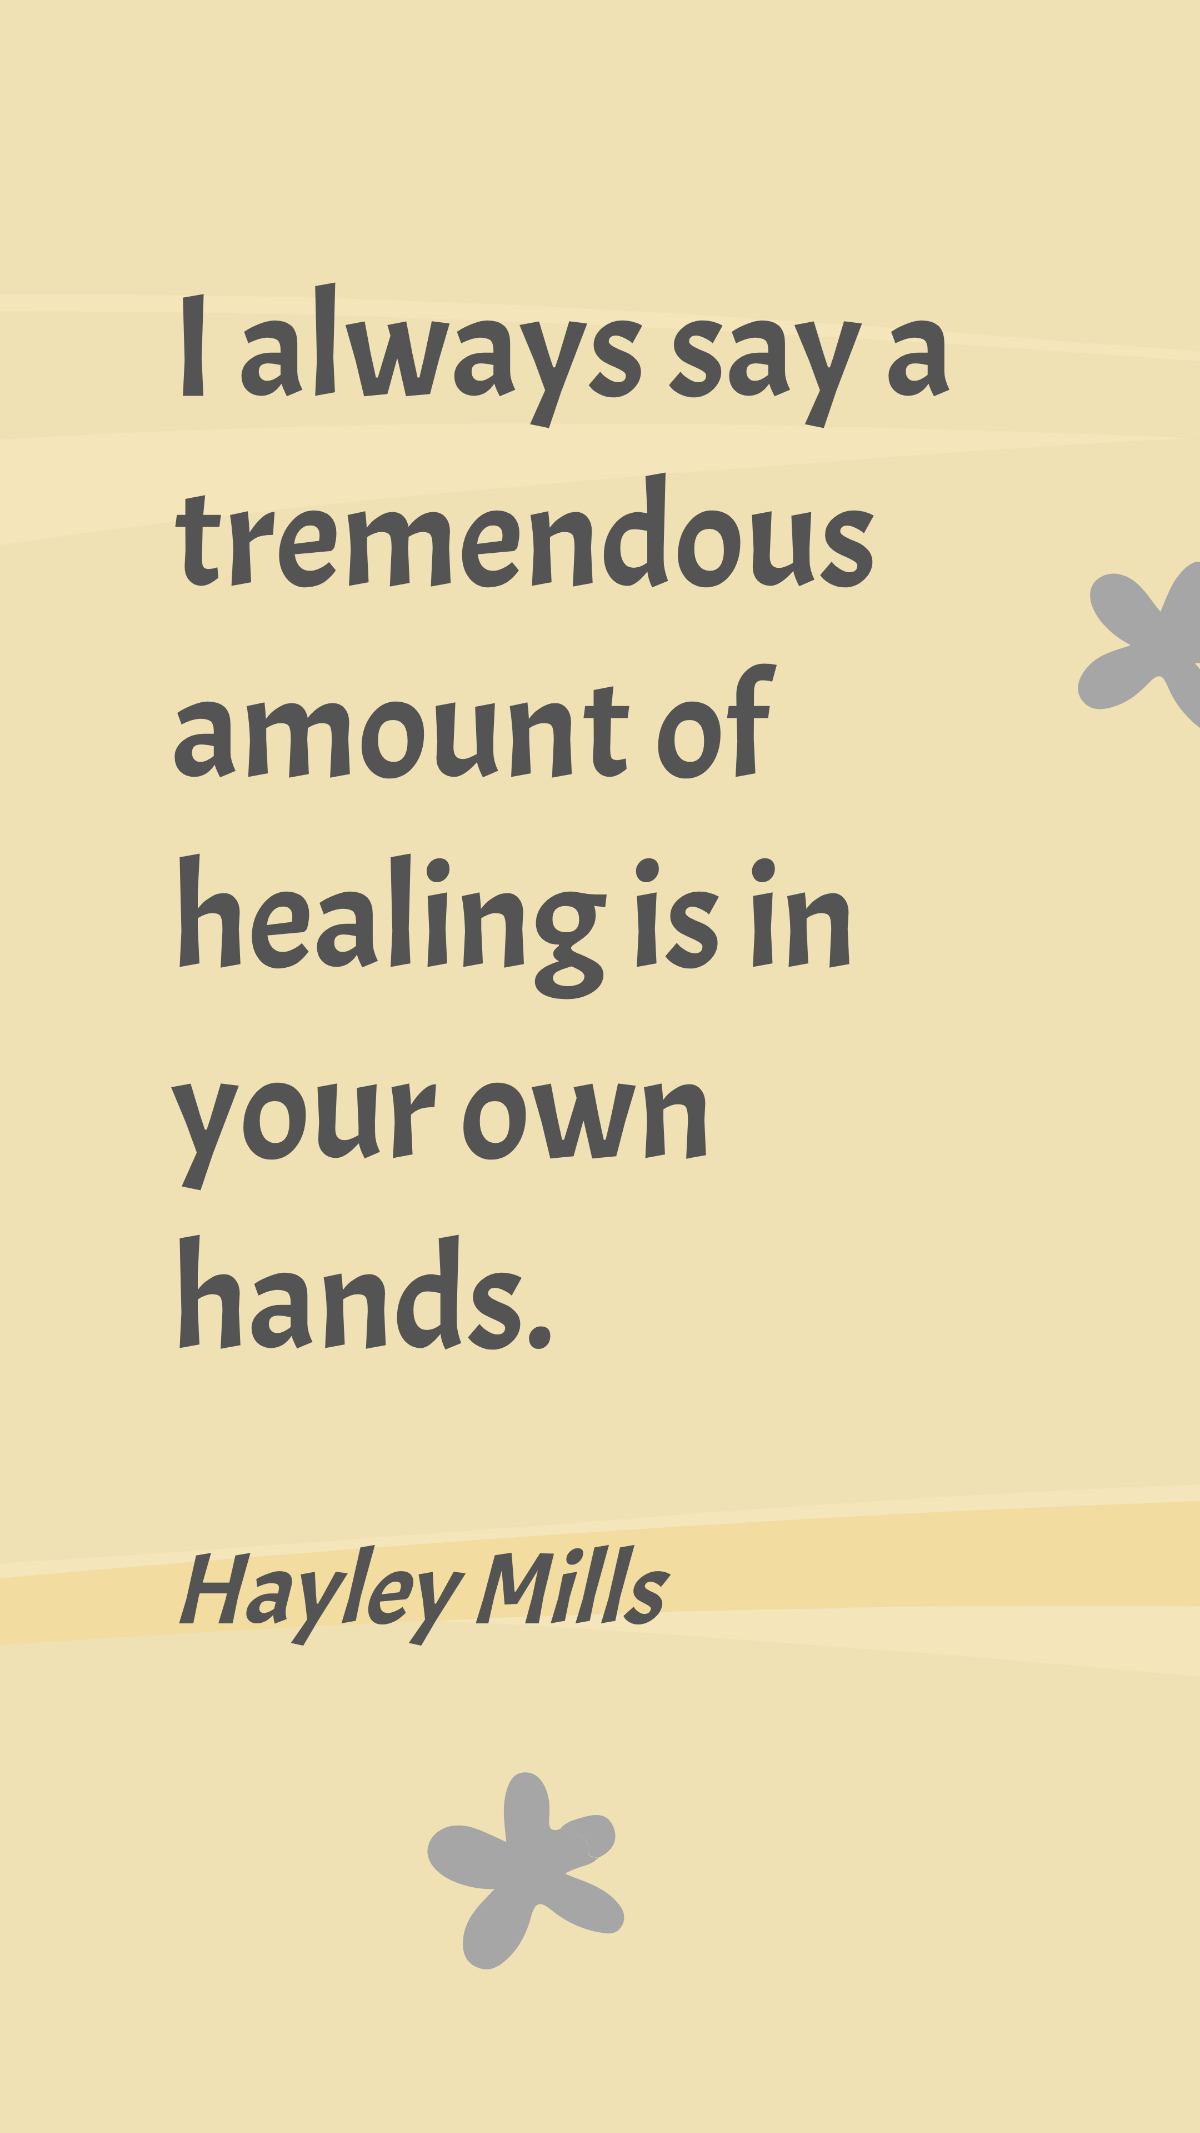 Free Hayley Mills - I always say a tremendous amount of healing is in your own hands. Template